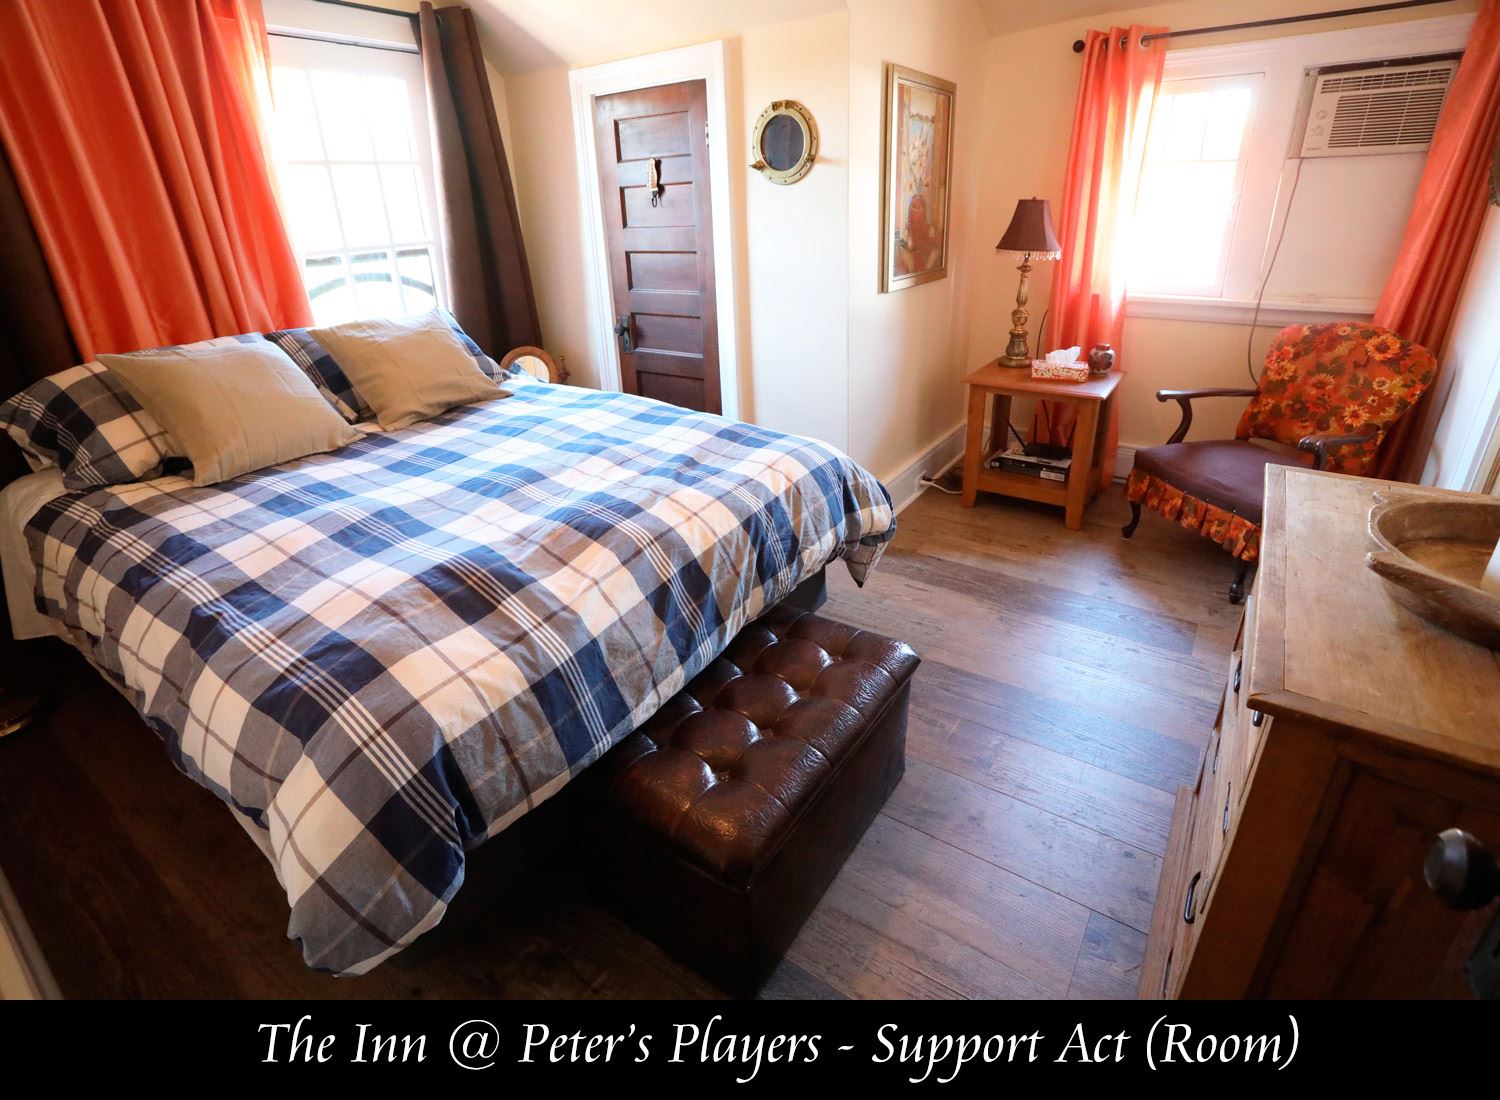 A bedroom at the inn at Peters Players